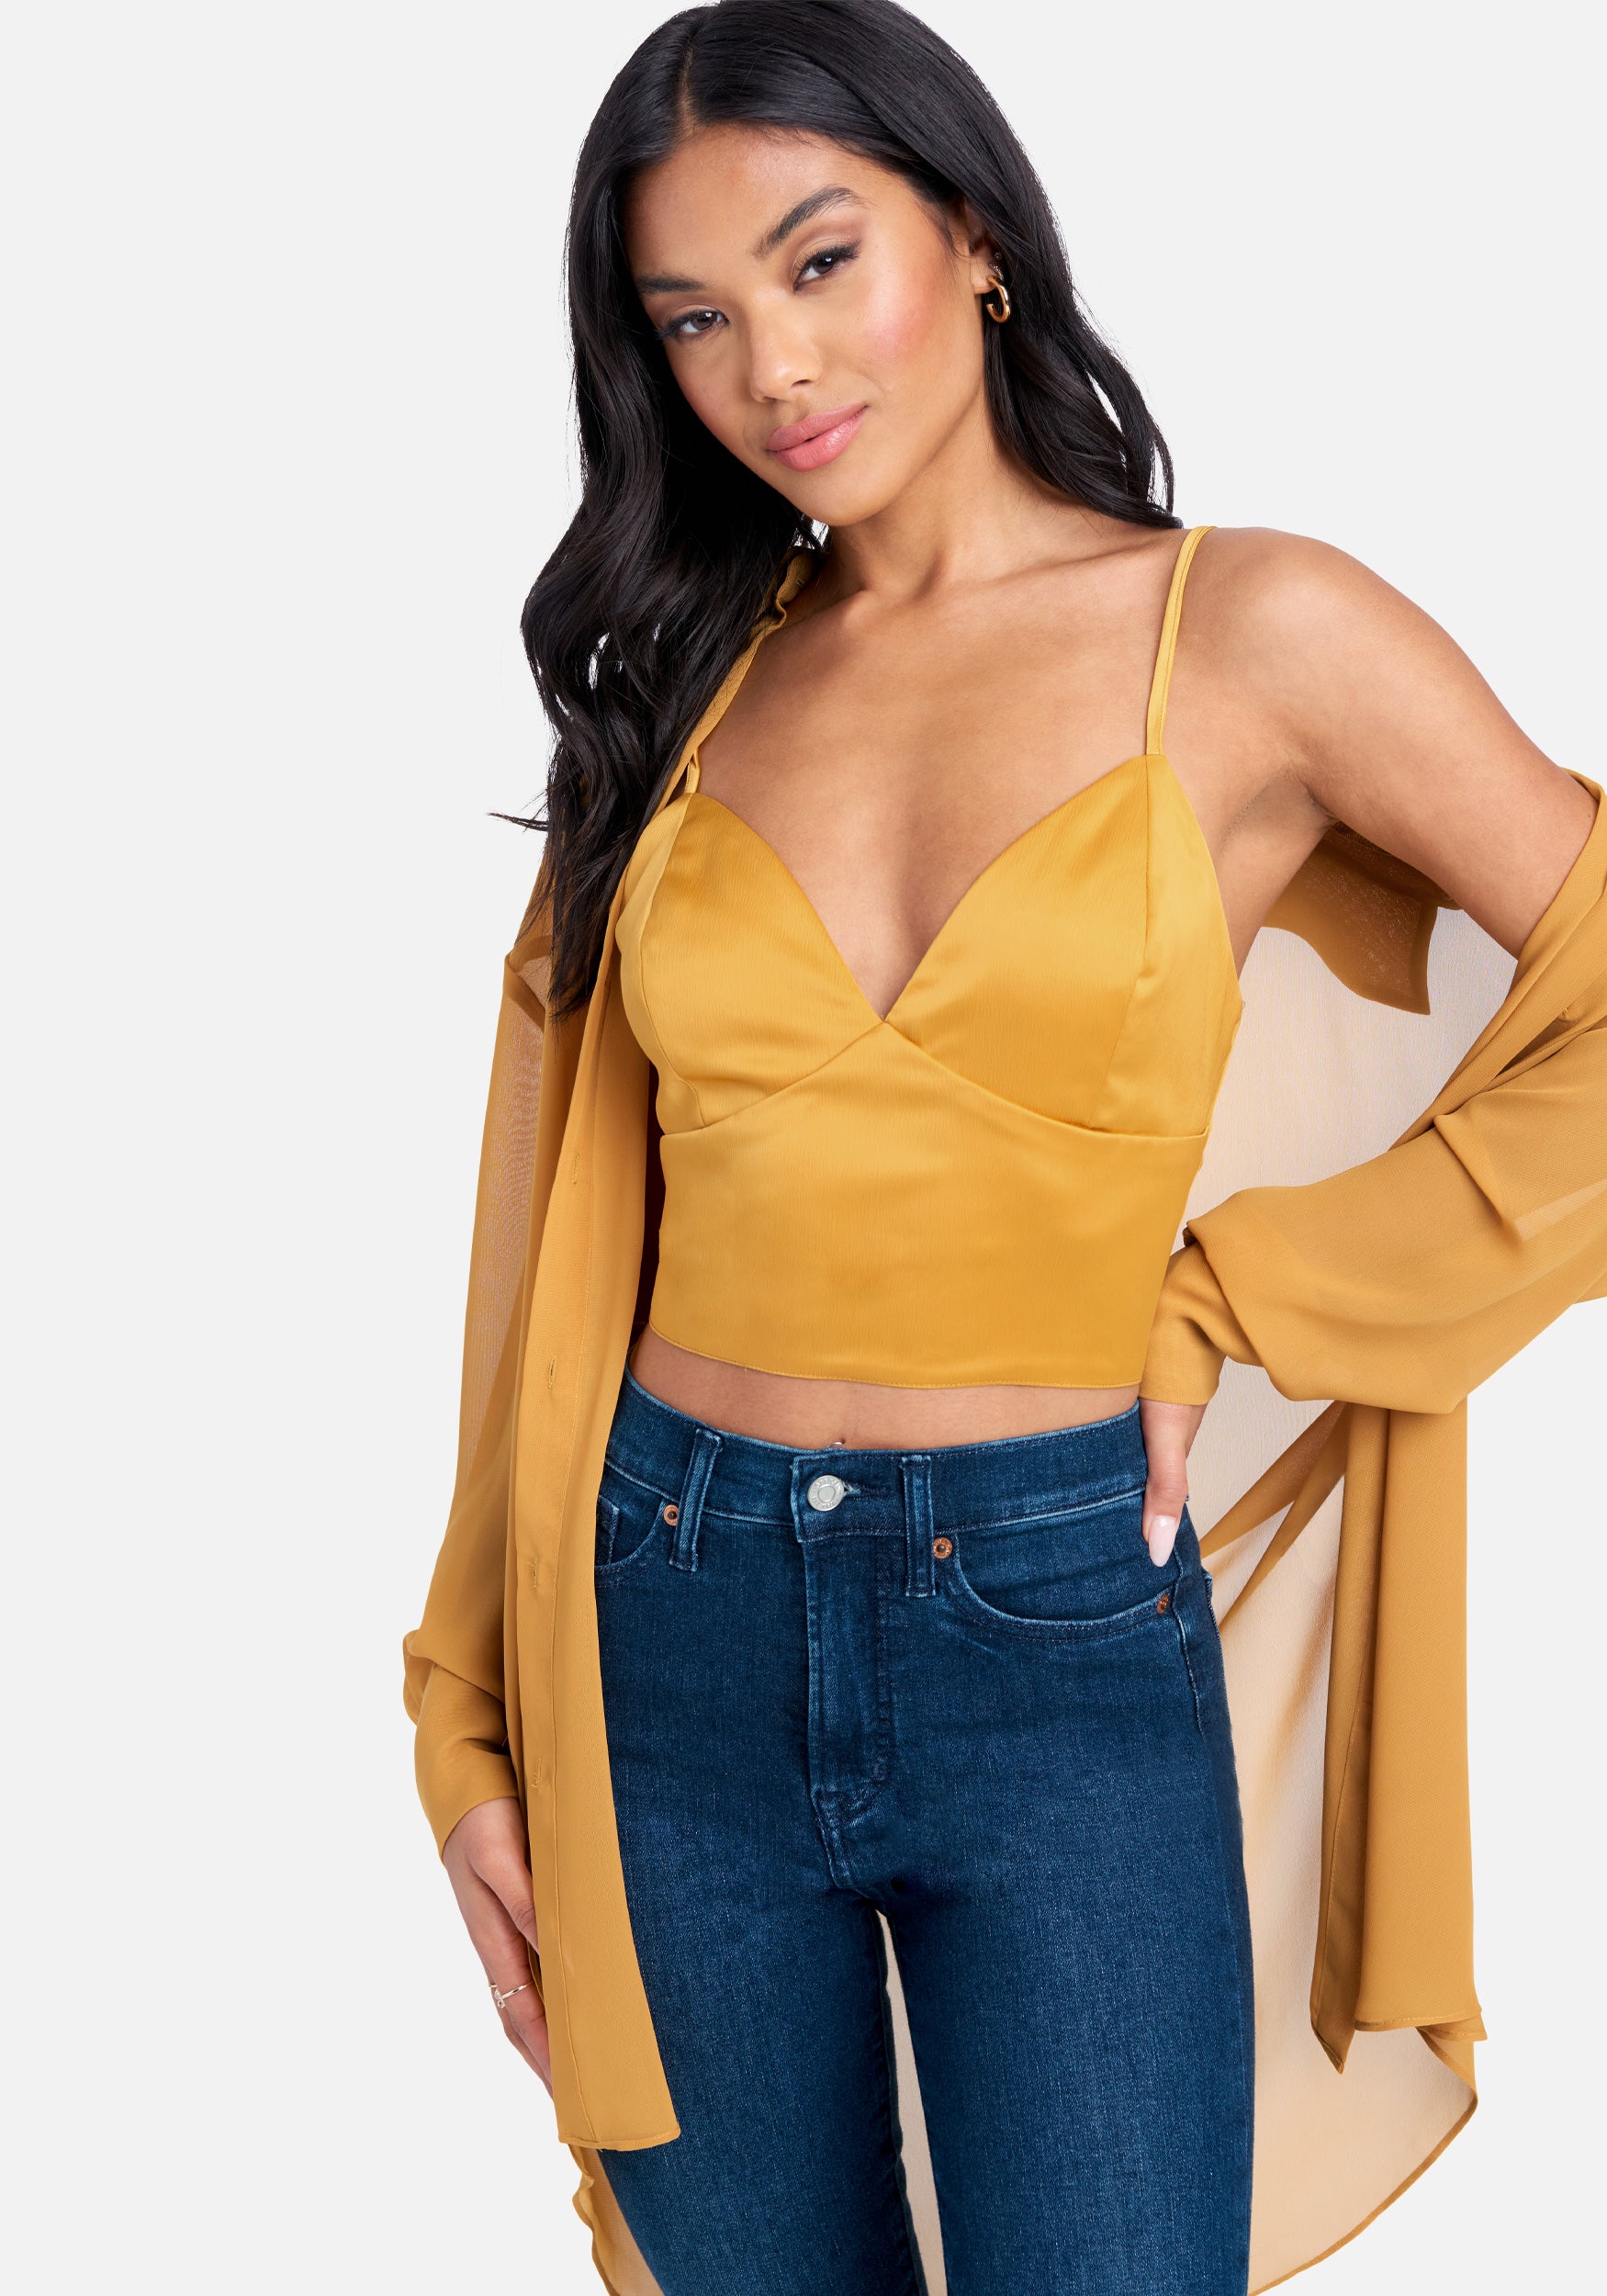  -Satin Bustier Top With Matching Chiffon Blouse